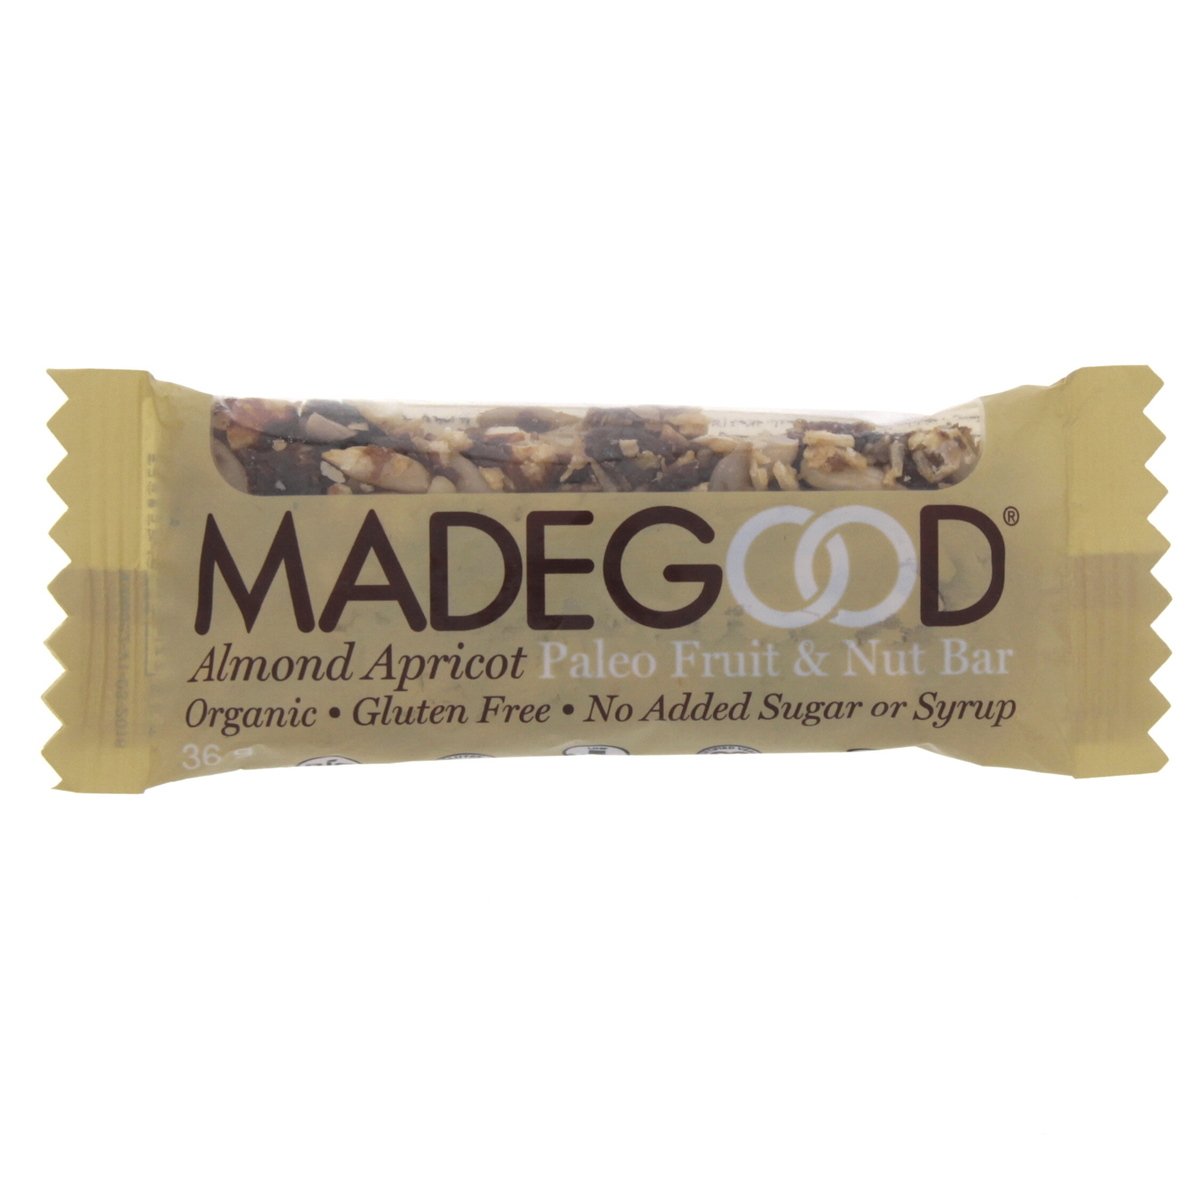 Made Good Almond Apricot Paleo Fruit And Nut Bar 36 g